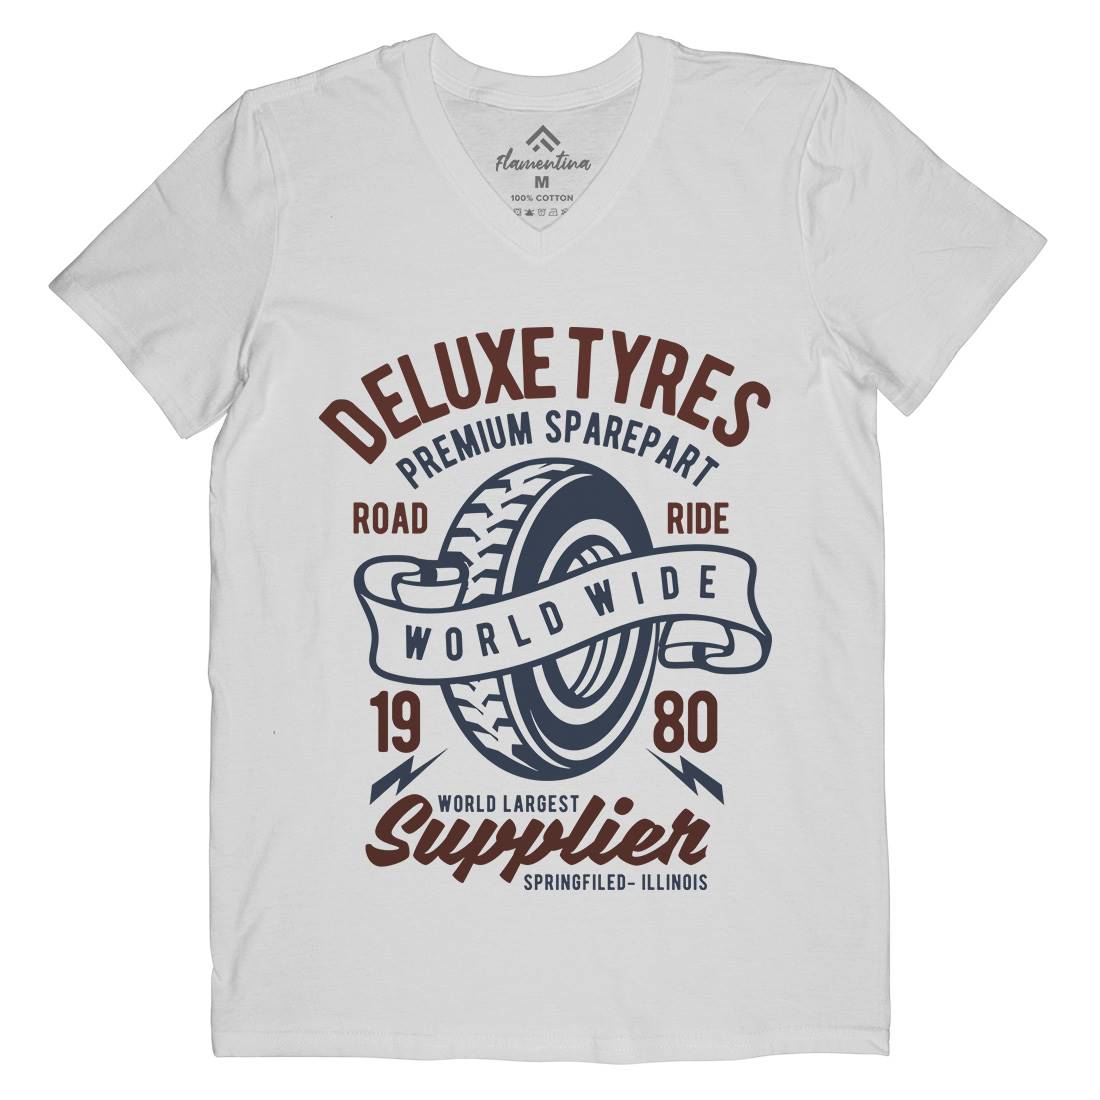 Deluxe Tyres Mens V-Neck T-Shirt Cars B204